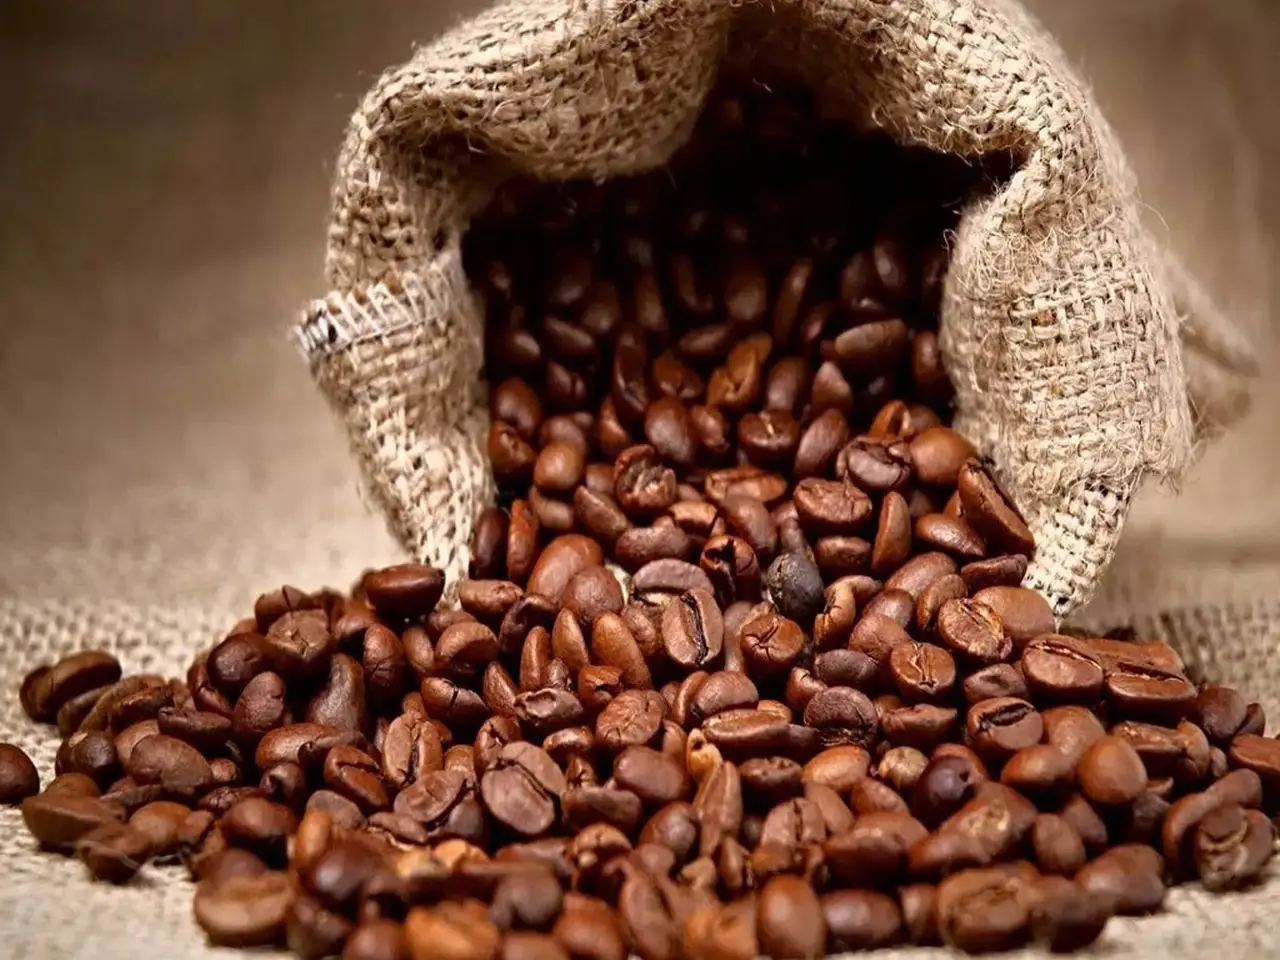 Globally, Coffee has been one of the top traded soft-commodity contracts.